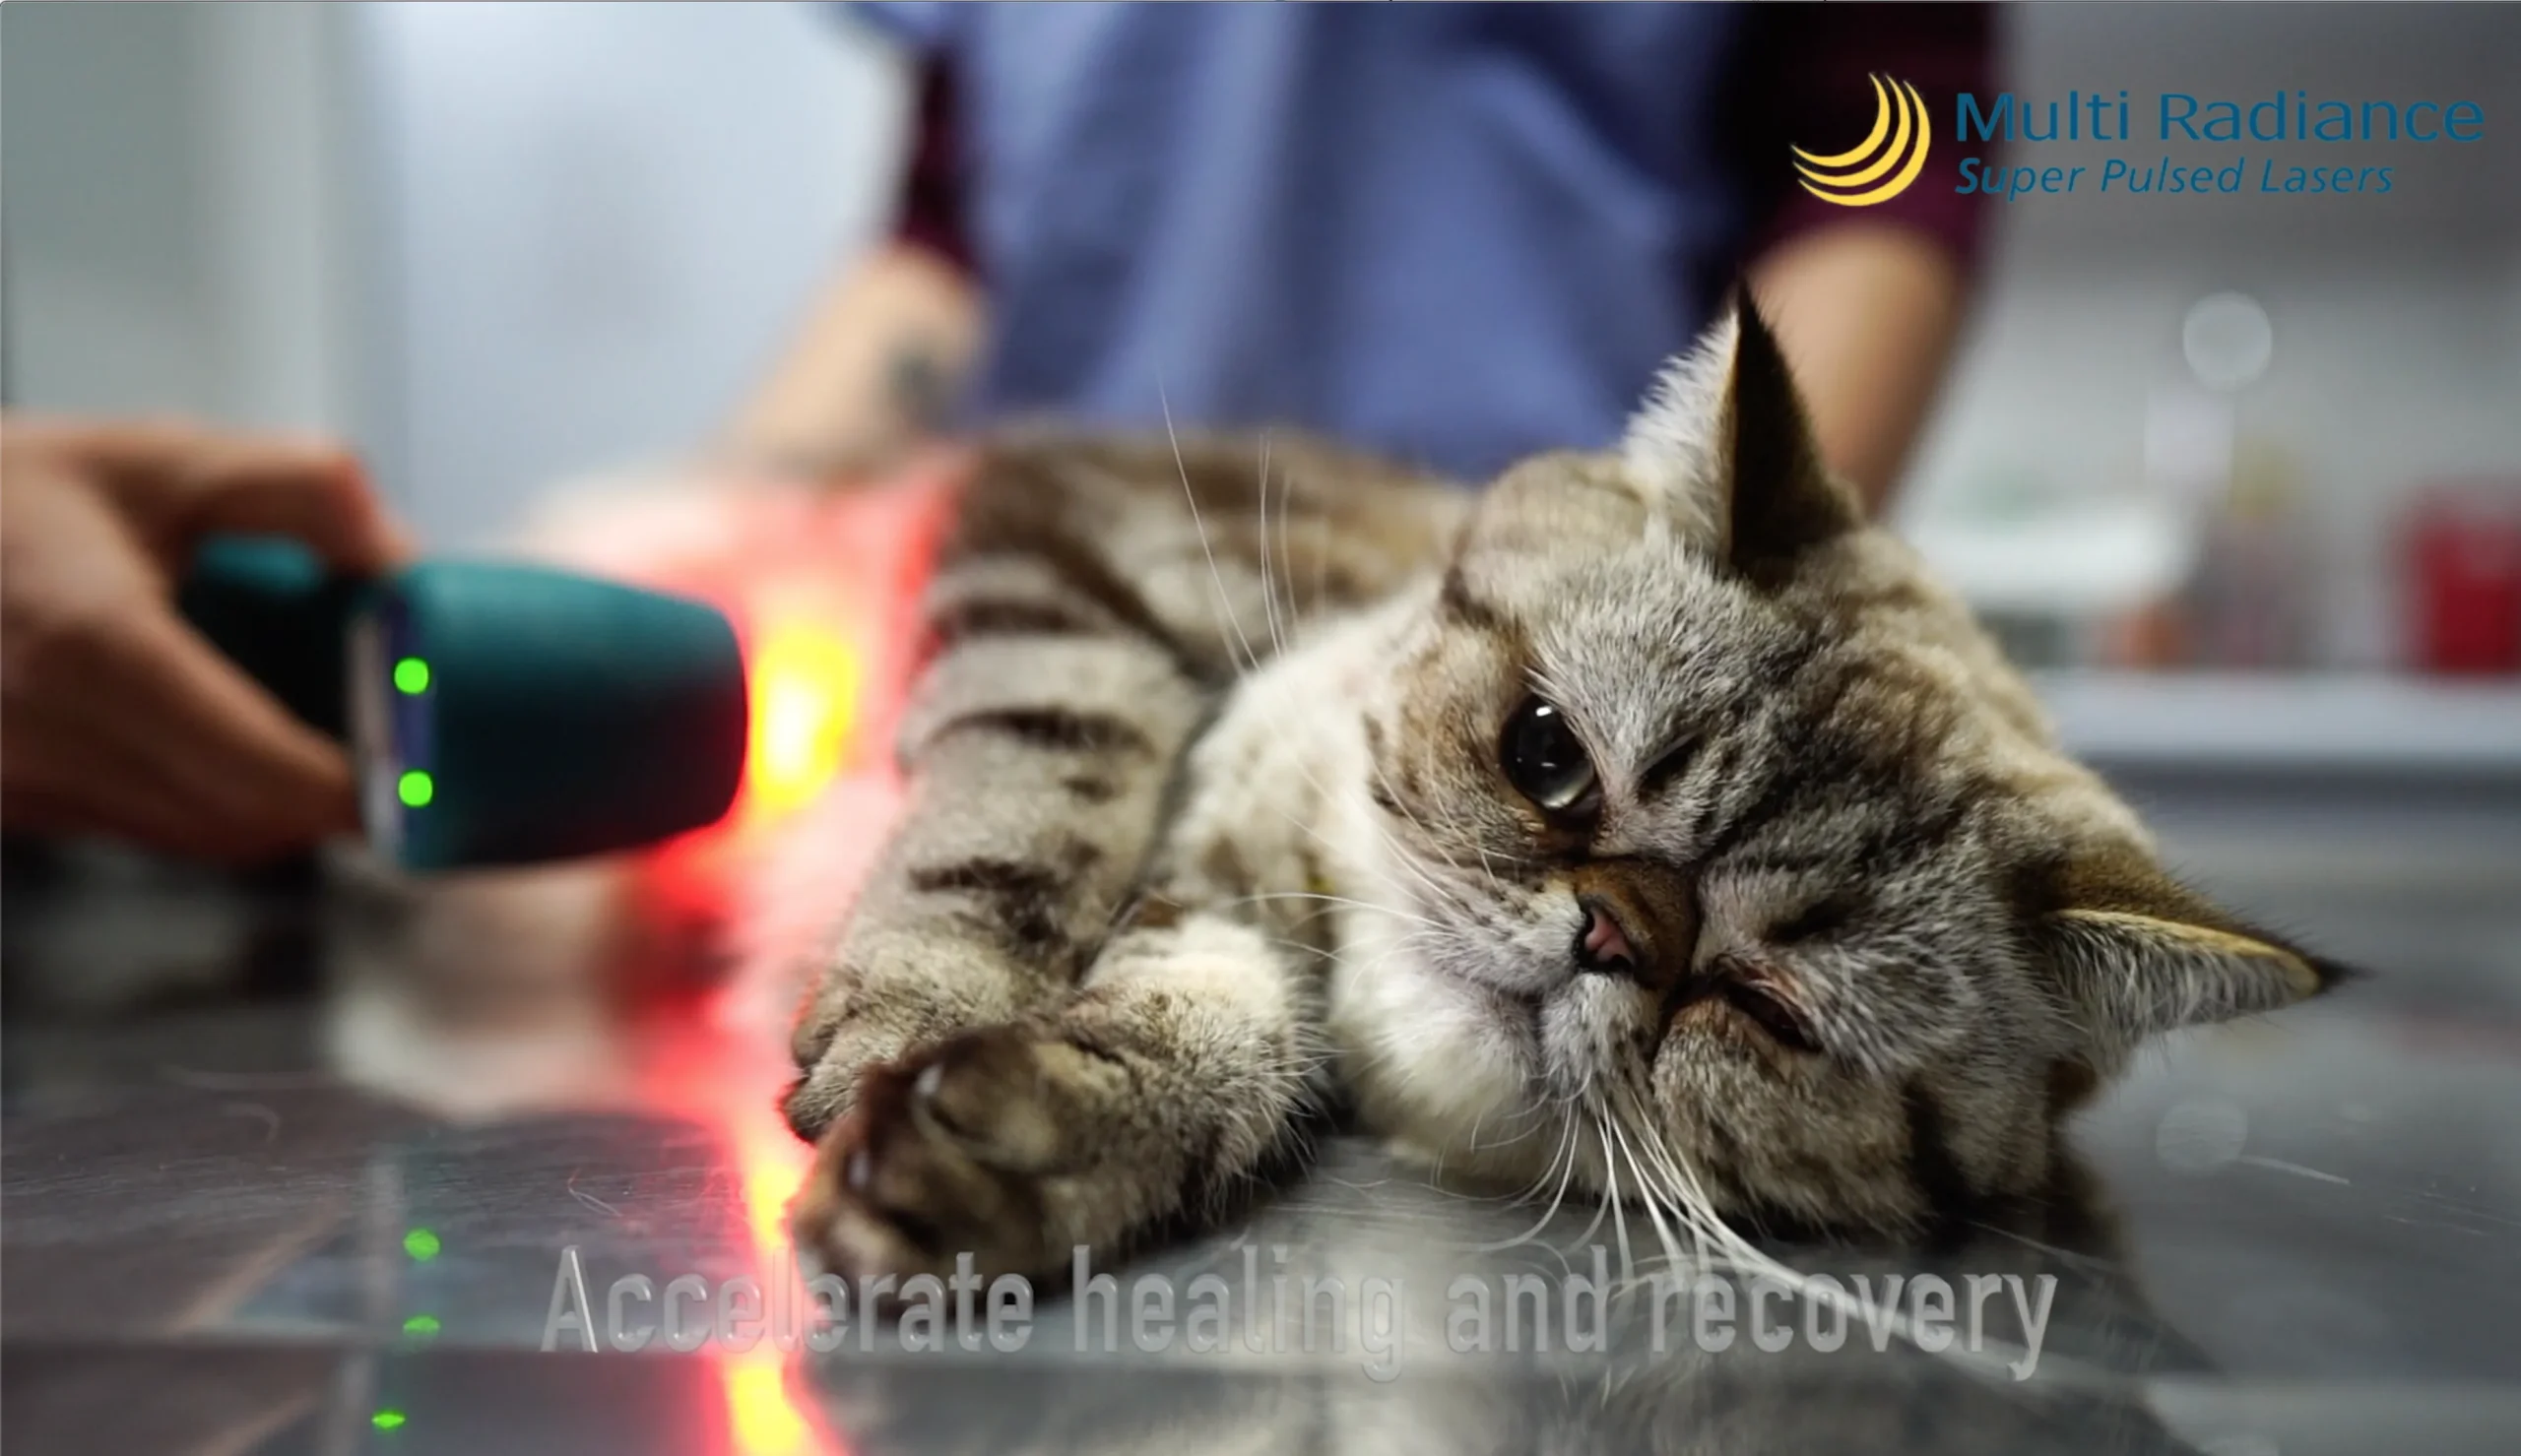 Multi Radiance laser therapy for cats